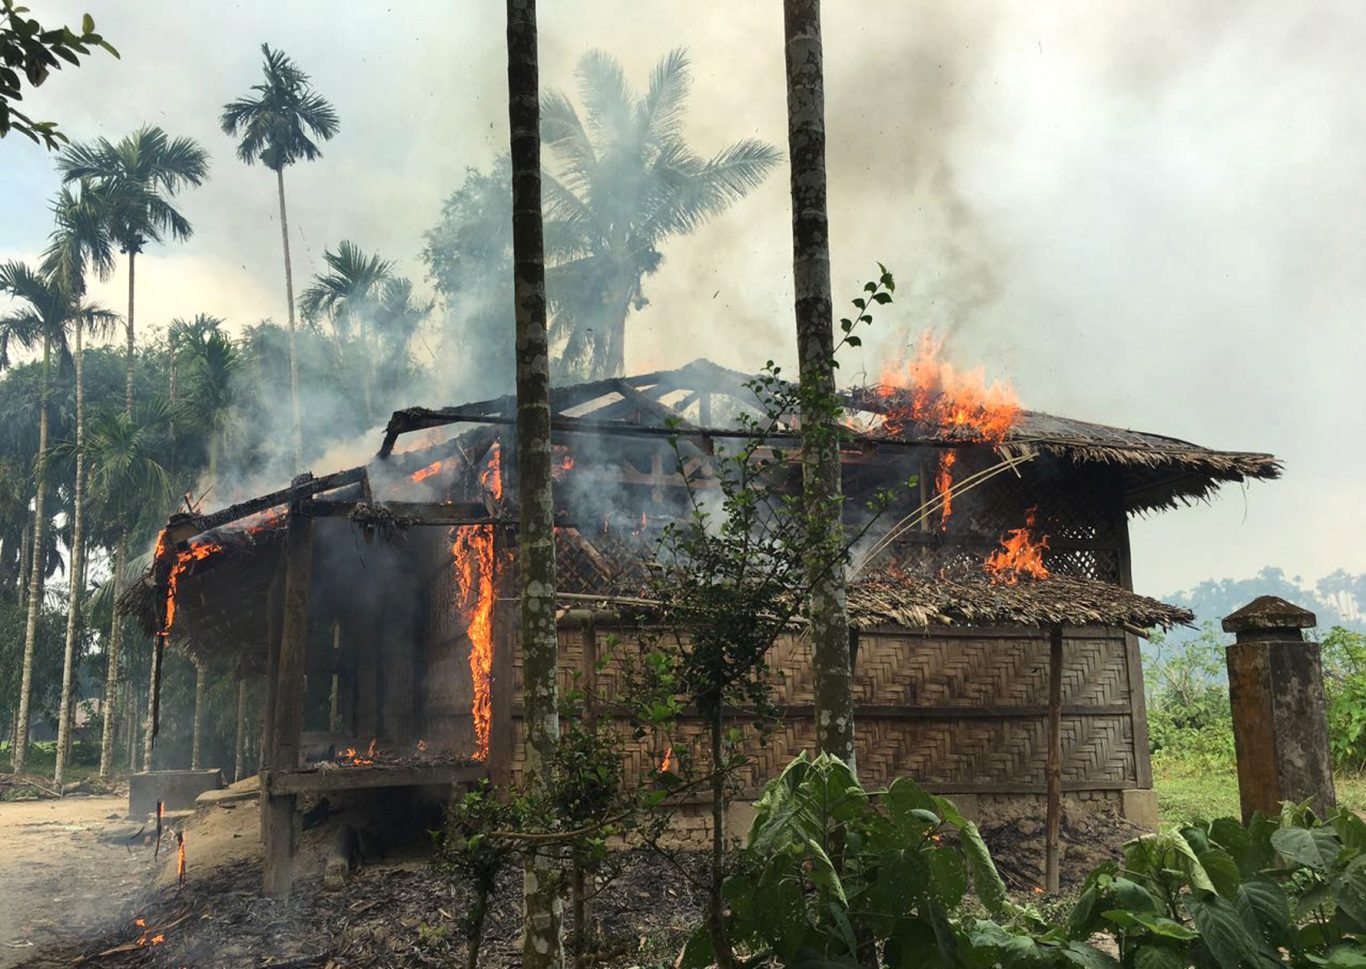 Journalists saw new fires burning Thursday in the village that had been abandoned by Rohingya Muslims, and where pages from Islamic texts were seen ripped and left on the ground (AP)